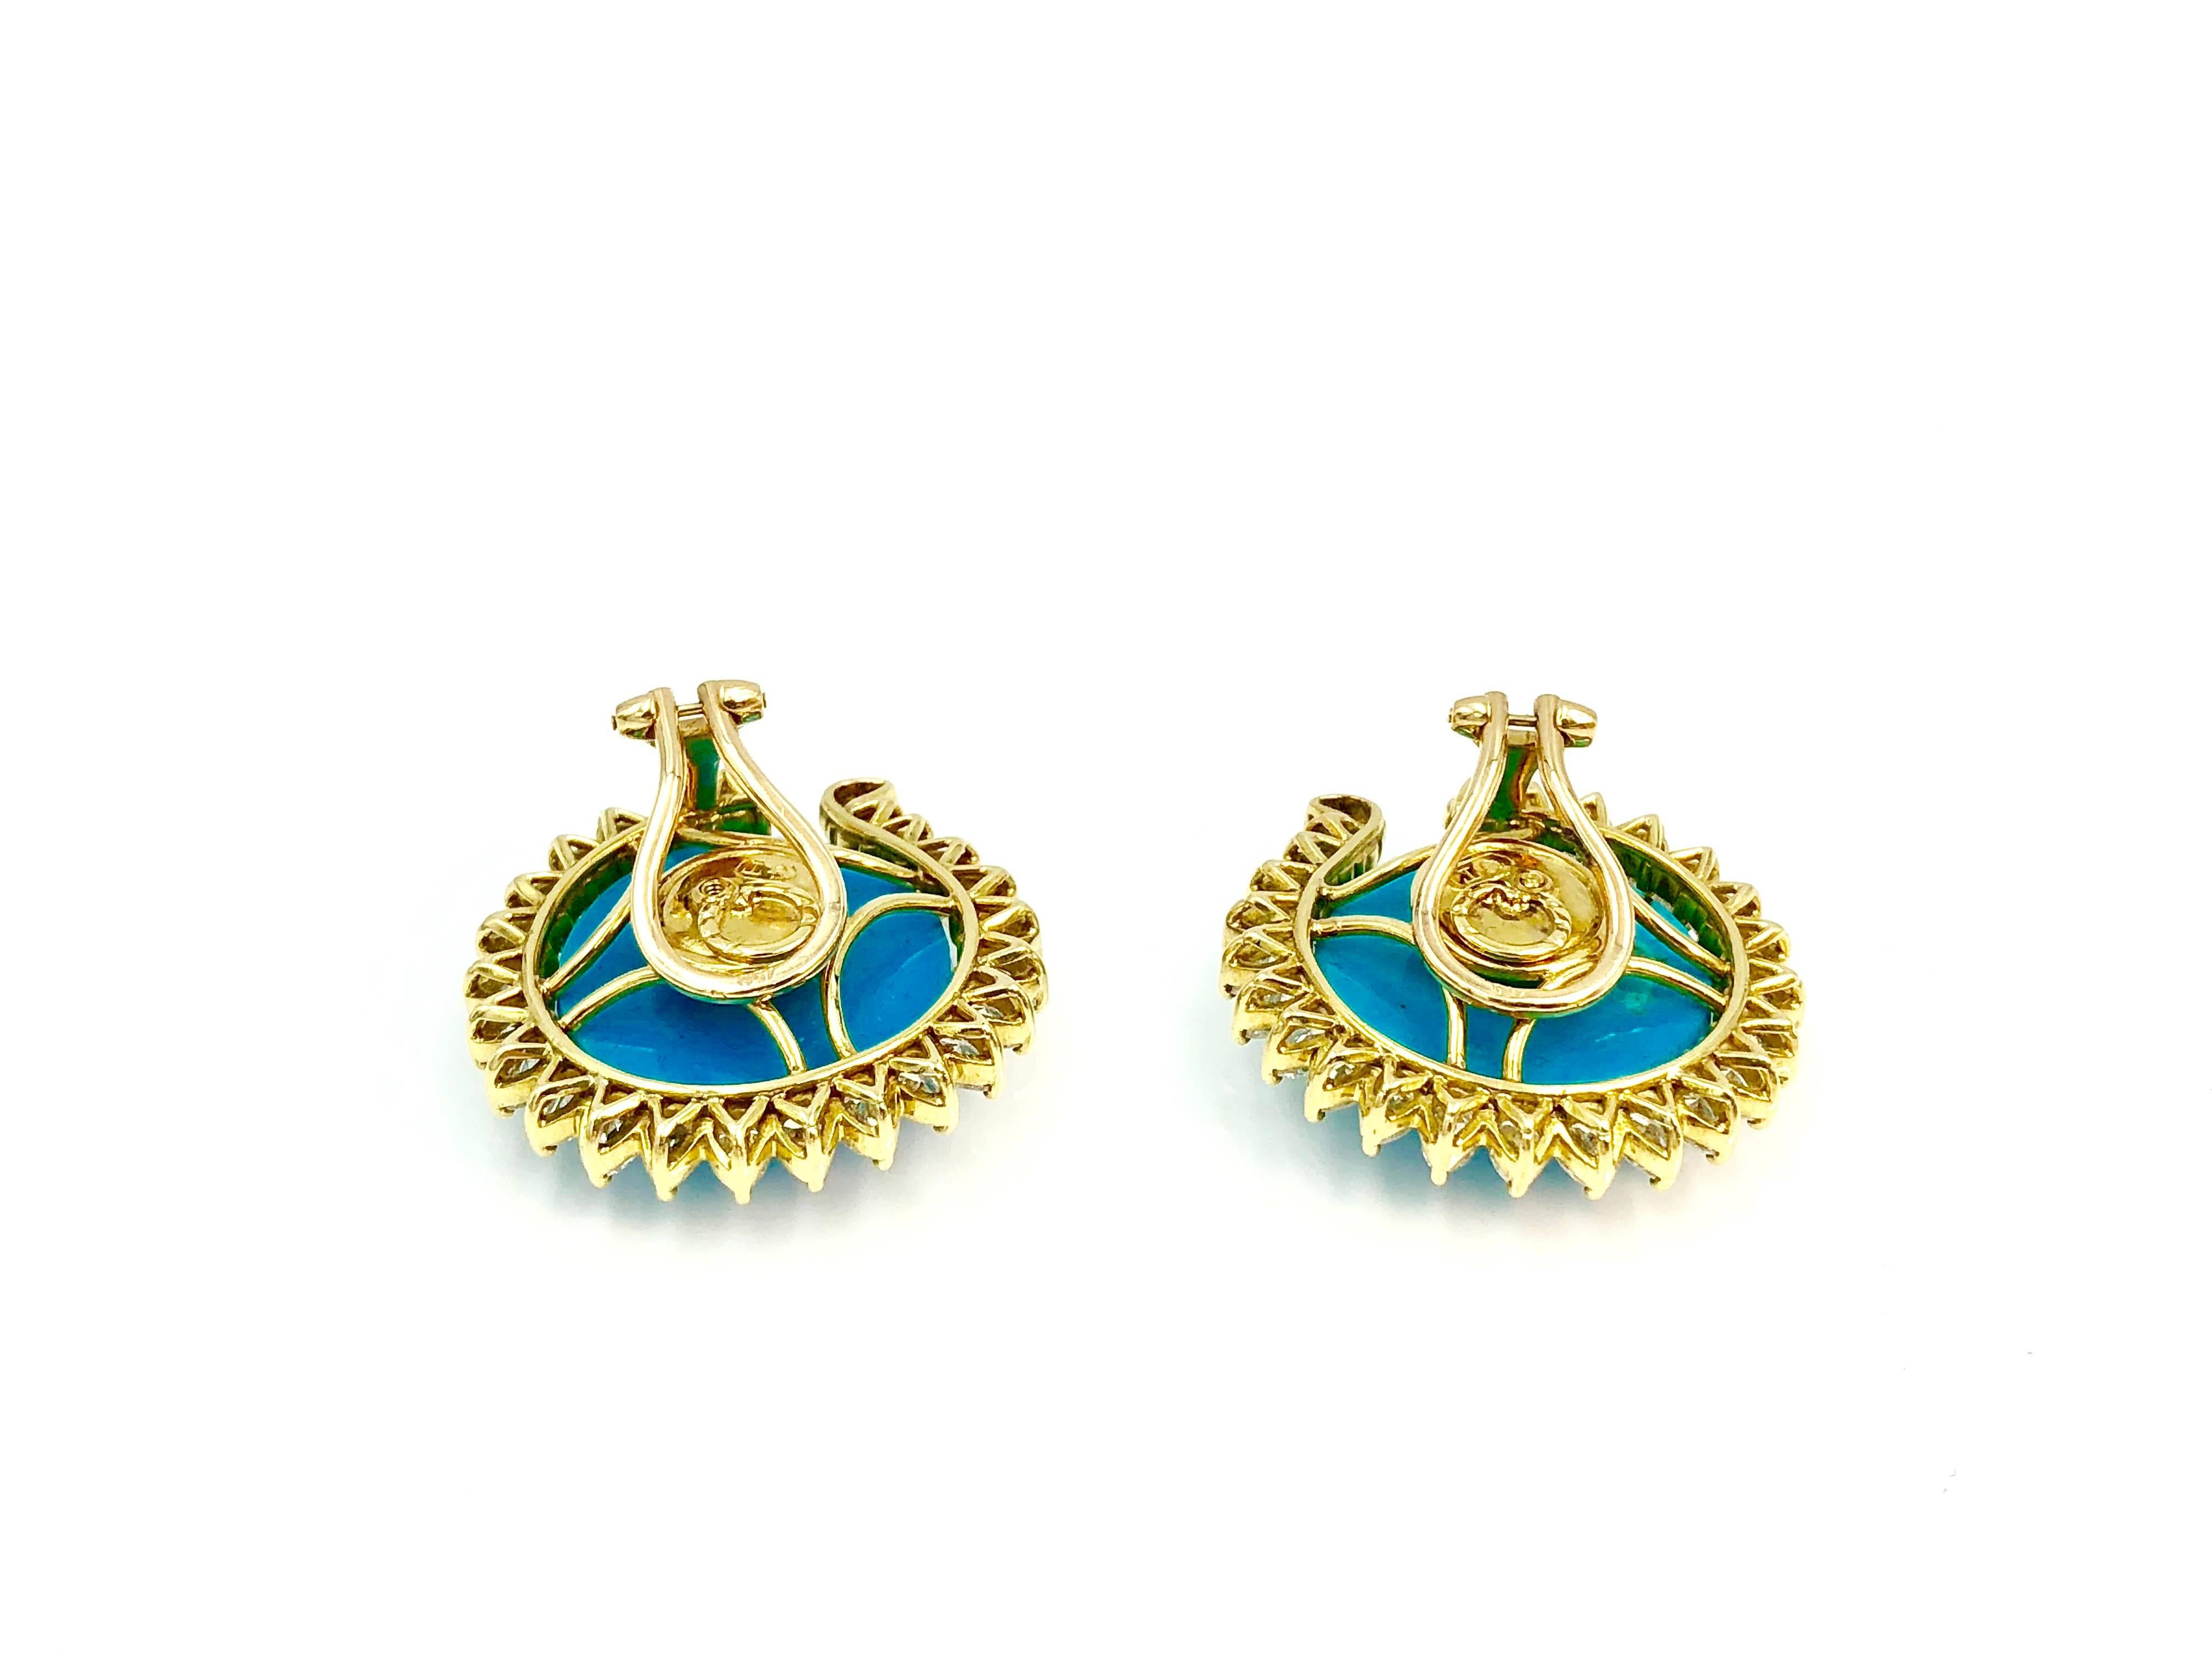 A pair of gold earrings centered by two beautiful round and flat turquoises, surrounded by a line of per shape diamonds. Can be worn everyday by an elegant lady.

Turquoise, Diamond (total fo 50 Stones , pear shape, 4 ct ca.)

The item is signed GT